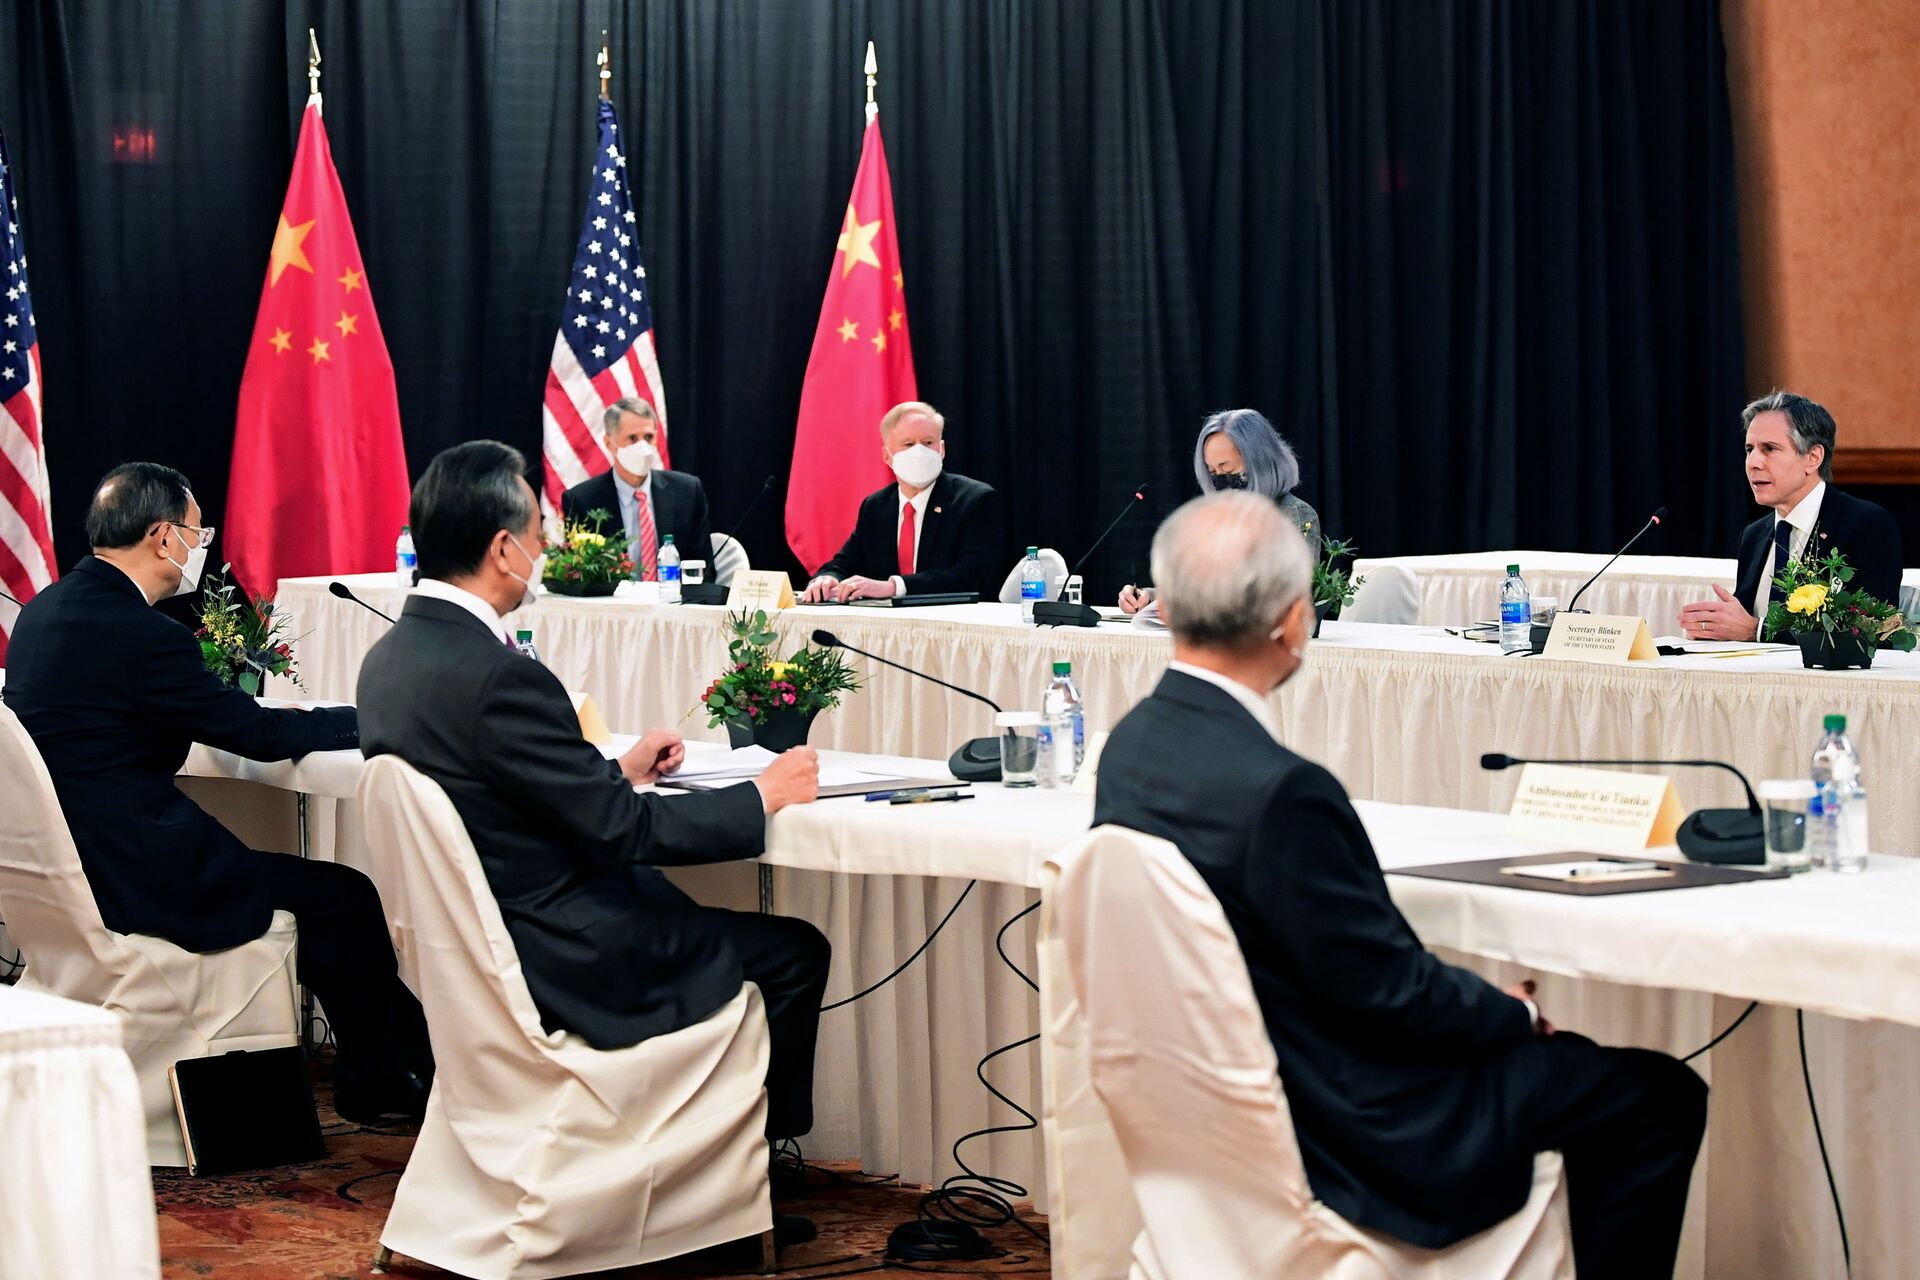 U.S. Secretary of State Antony Blinken (R) speaks while facing Yang Jiechi (L), director of the Central Foreign Affairs Commission Office, and Wang Yi (2nd L), China's State Councilor Wang and Foreign Minister, at the opening session of US-China talks at the Captain Cook Hotel in Anchorage, Alaska on March 18, 2021. - Sputnik International, 1920, 07.09.2021